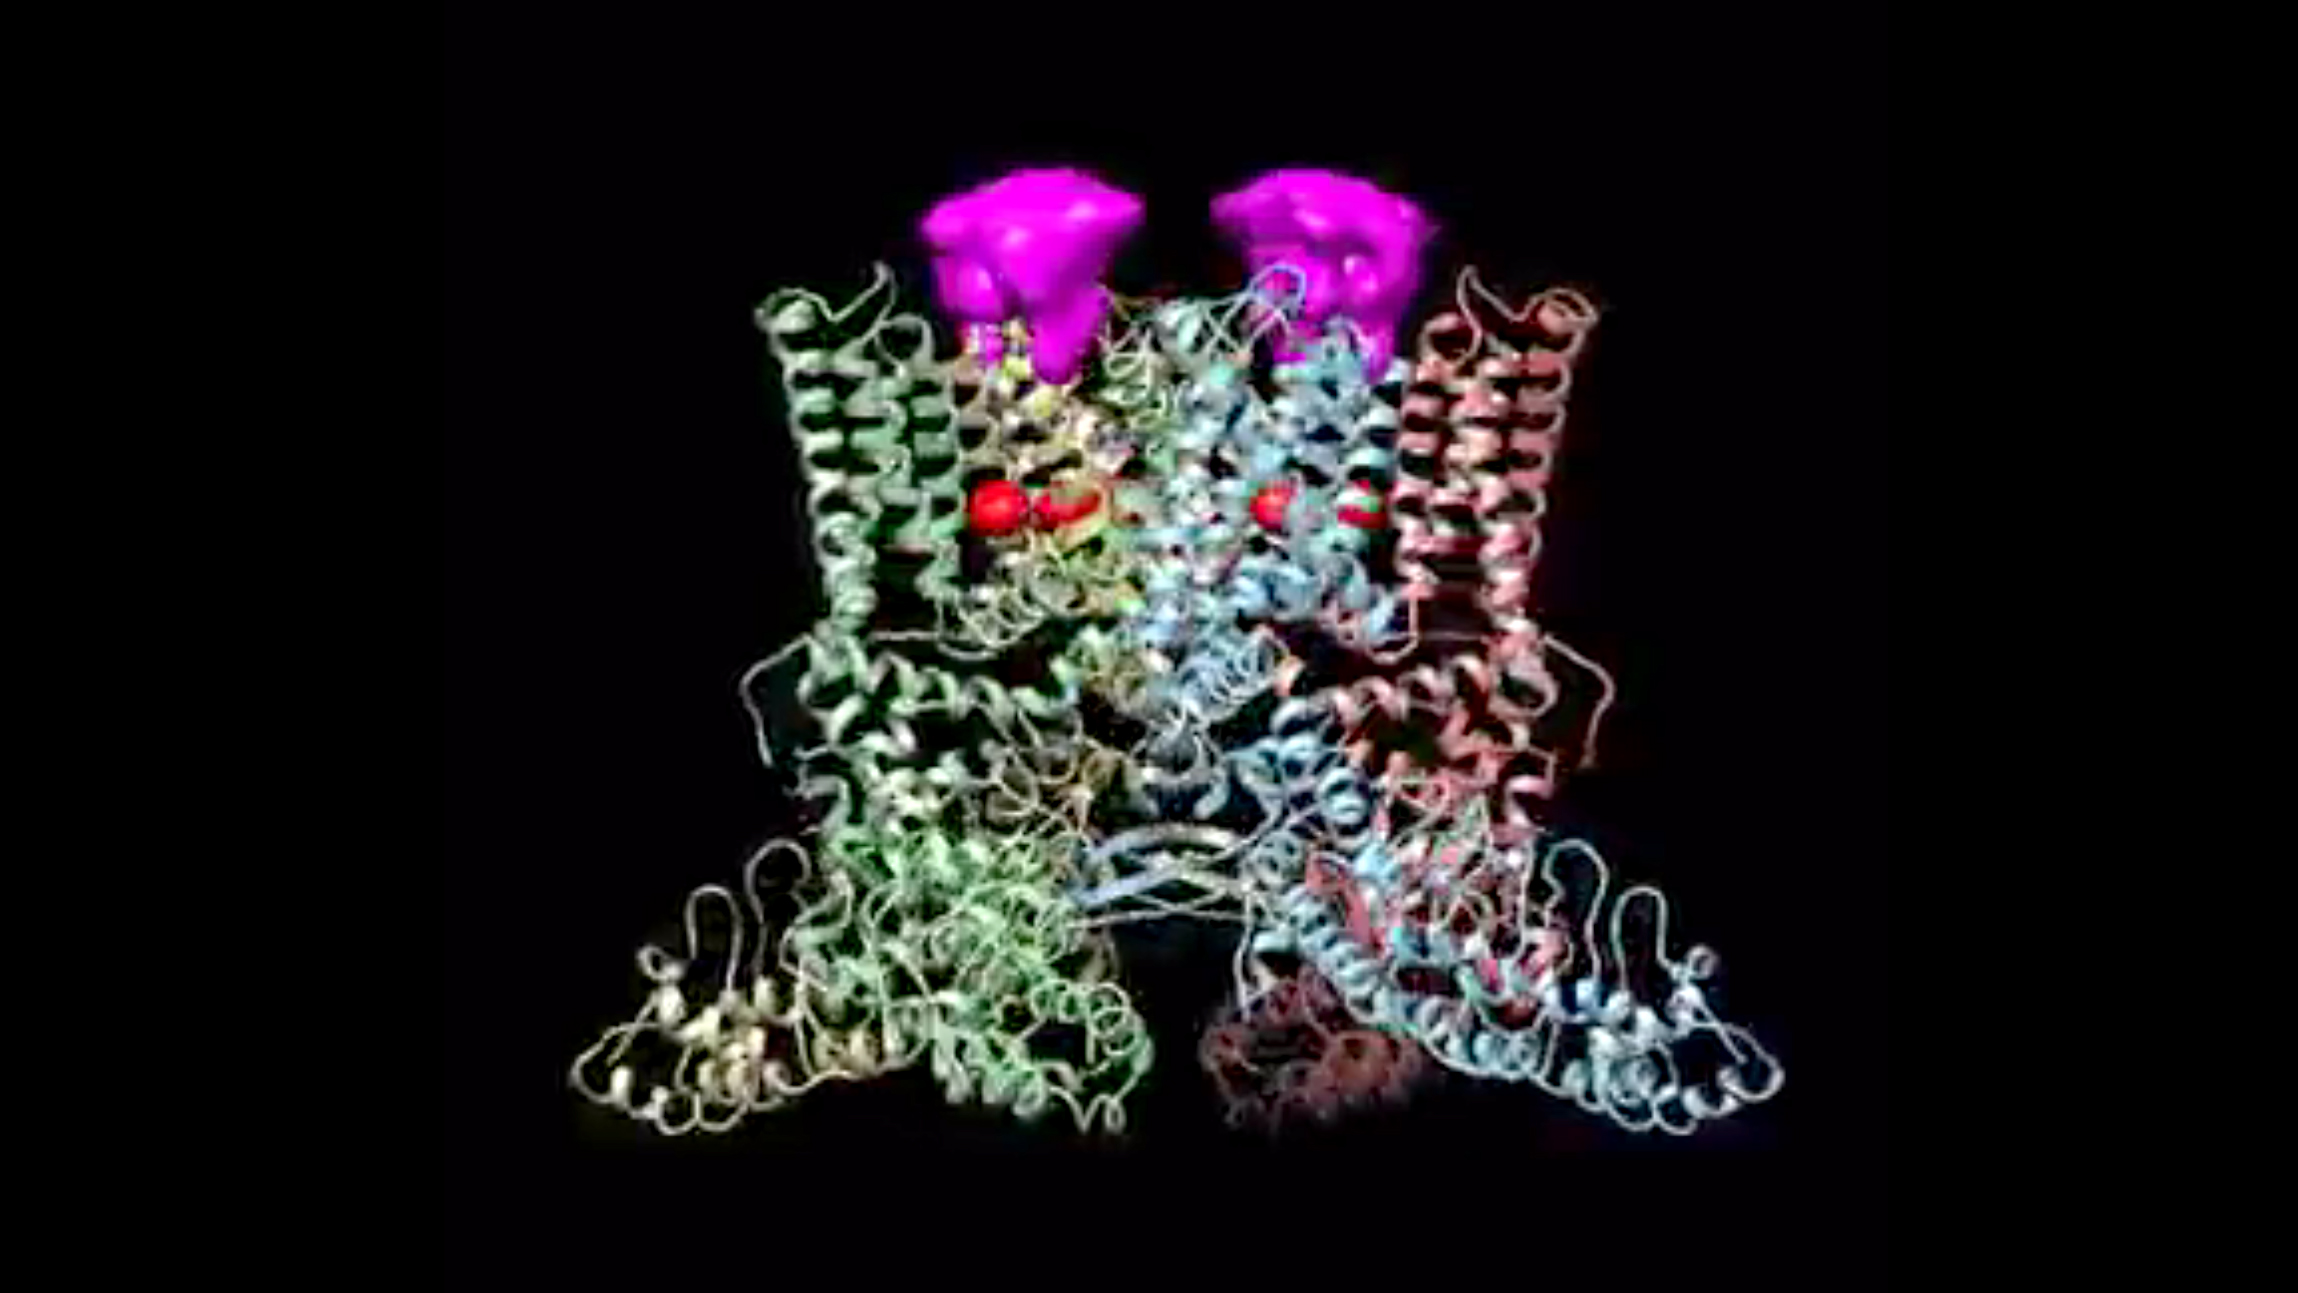 3-D model of the TRPV1 protein at 3.4 Angstroms, bound by both spider toxin (pink) and resiniferatoxin (red spheres). 